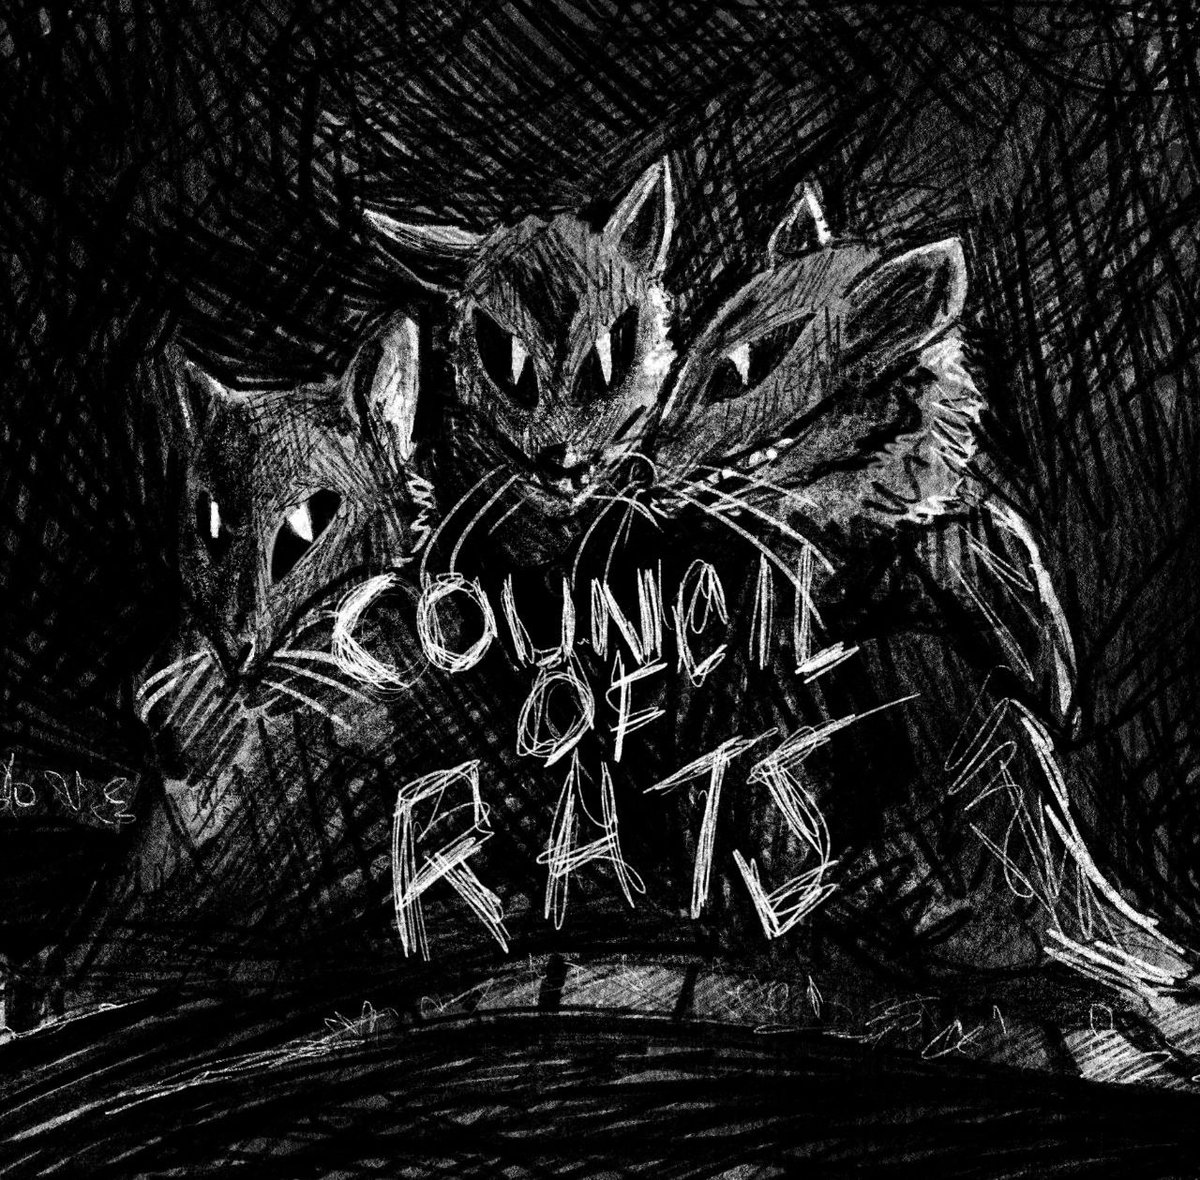 Tomorrow my song 'The Council of Rats' will be released with @bicyclegang. It will be available on all streaming platforms. Keep your ears on the look out. 🎶 🎵